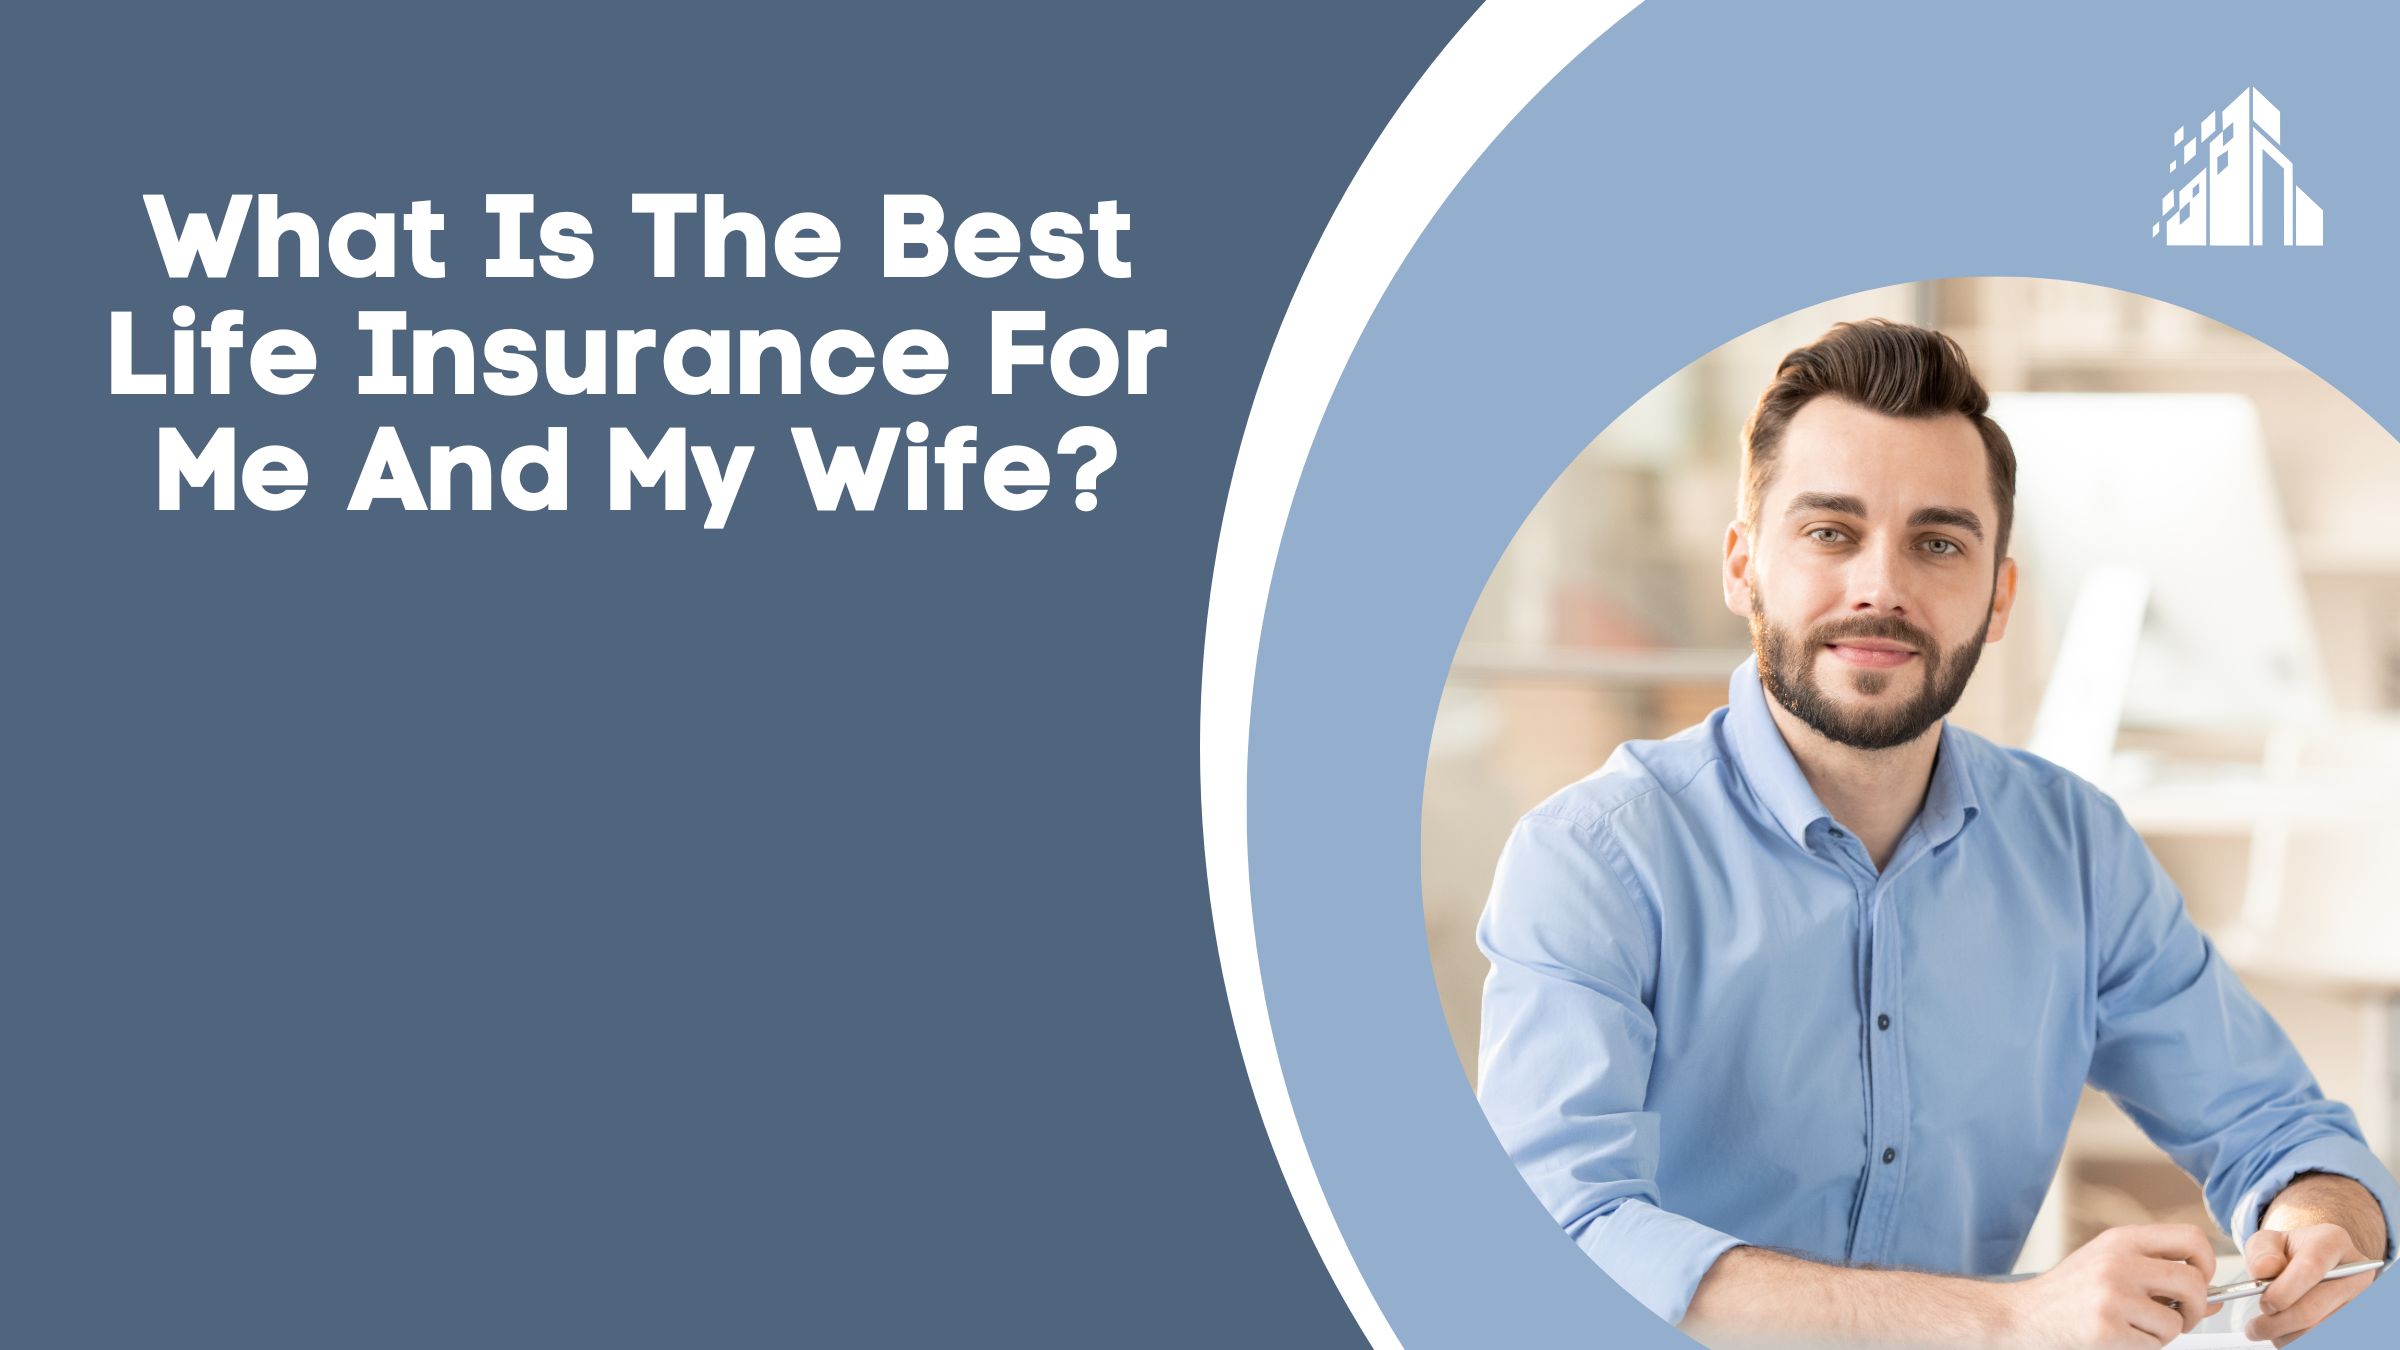 What Is The Best Life Insurance For Me And My Wife